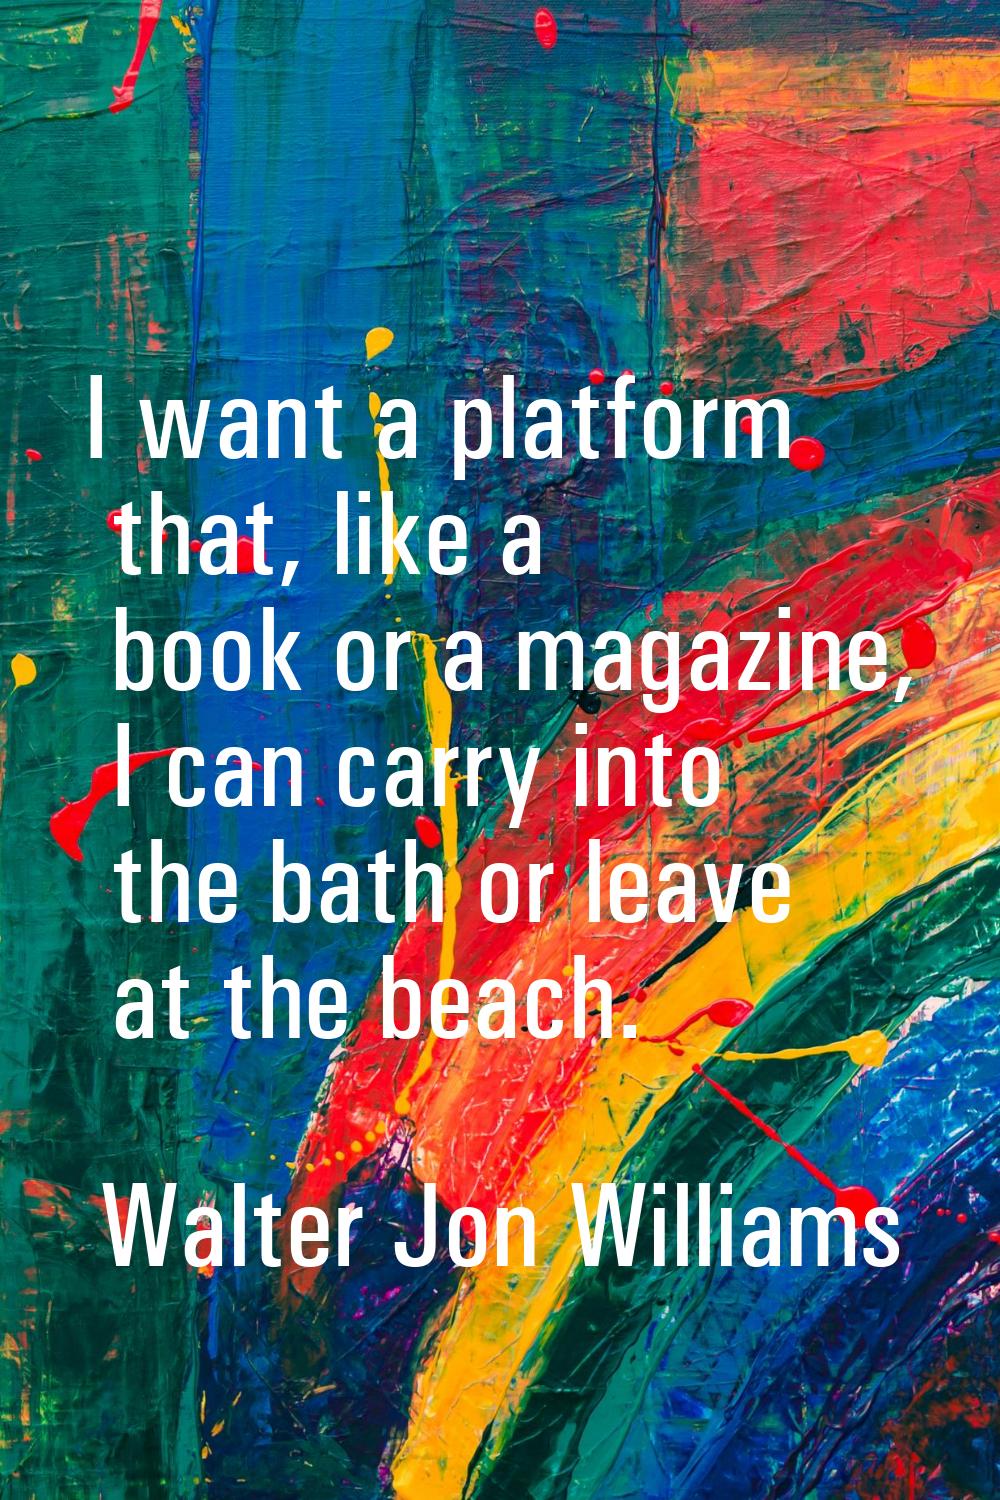 I want a platform that, like a book or a magazine, I can carry into the bath or leave at the beach.